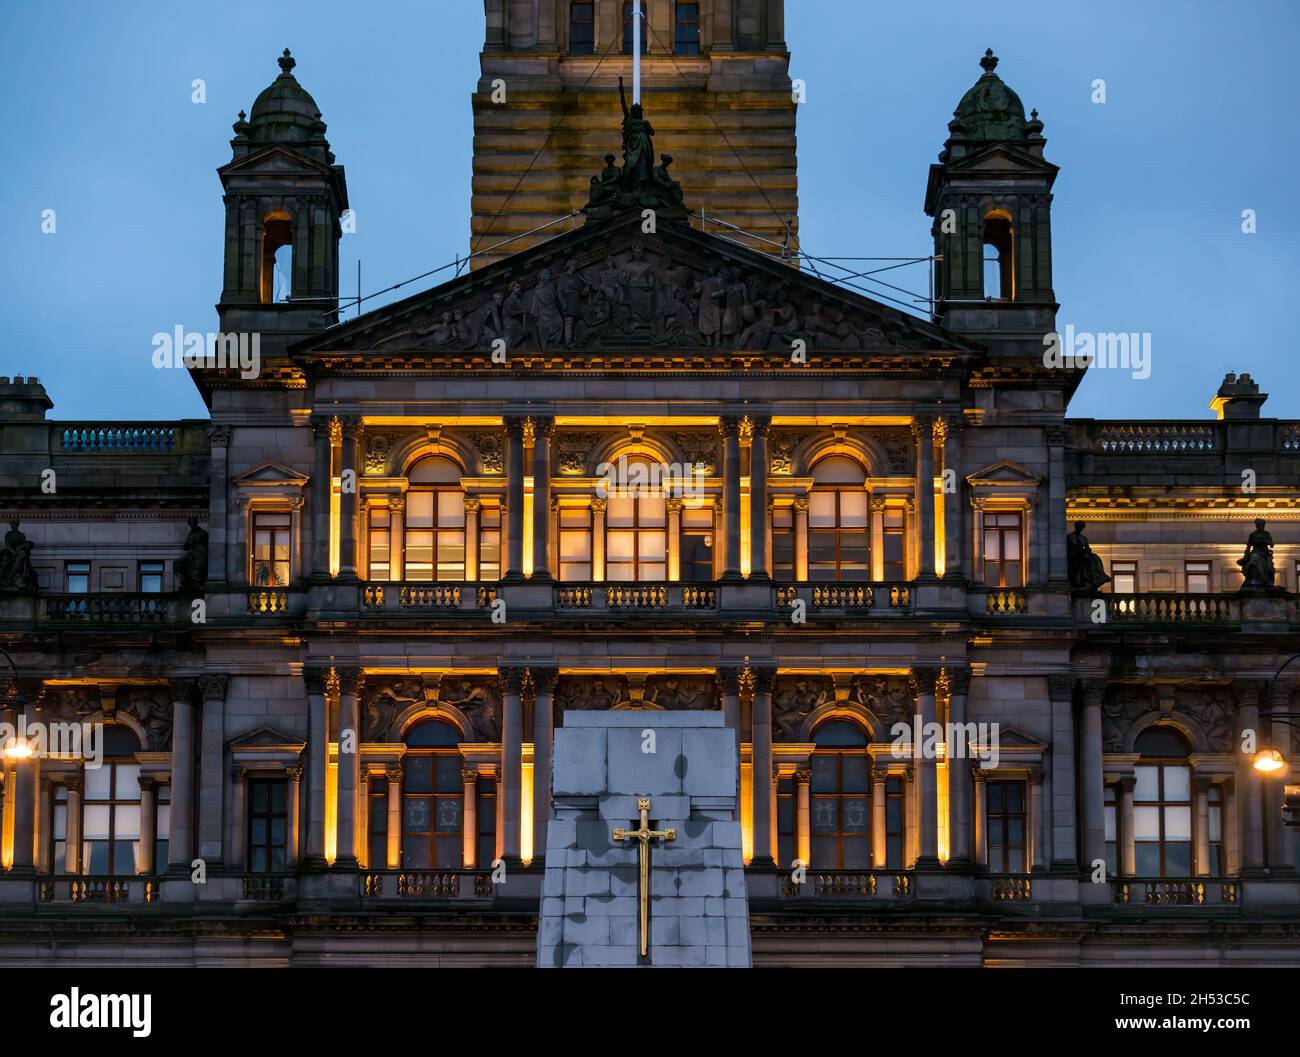 Glasgow City Chambers grand Victorian building lit up at night, George Square, Scotland, UK Stock Photo